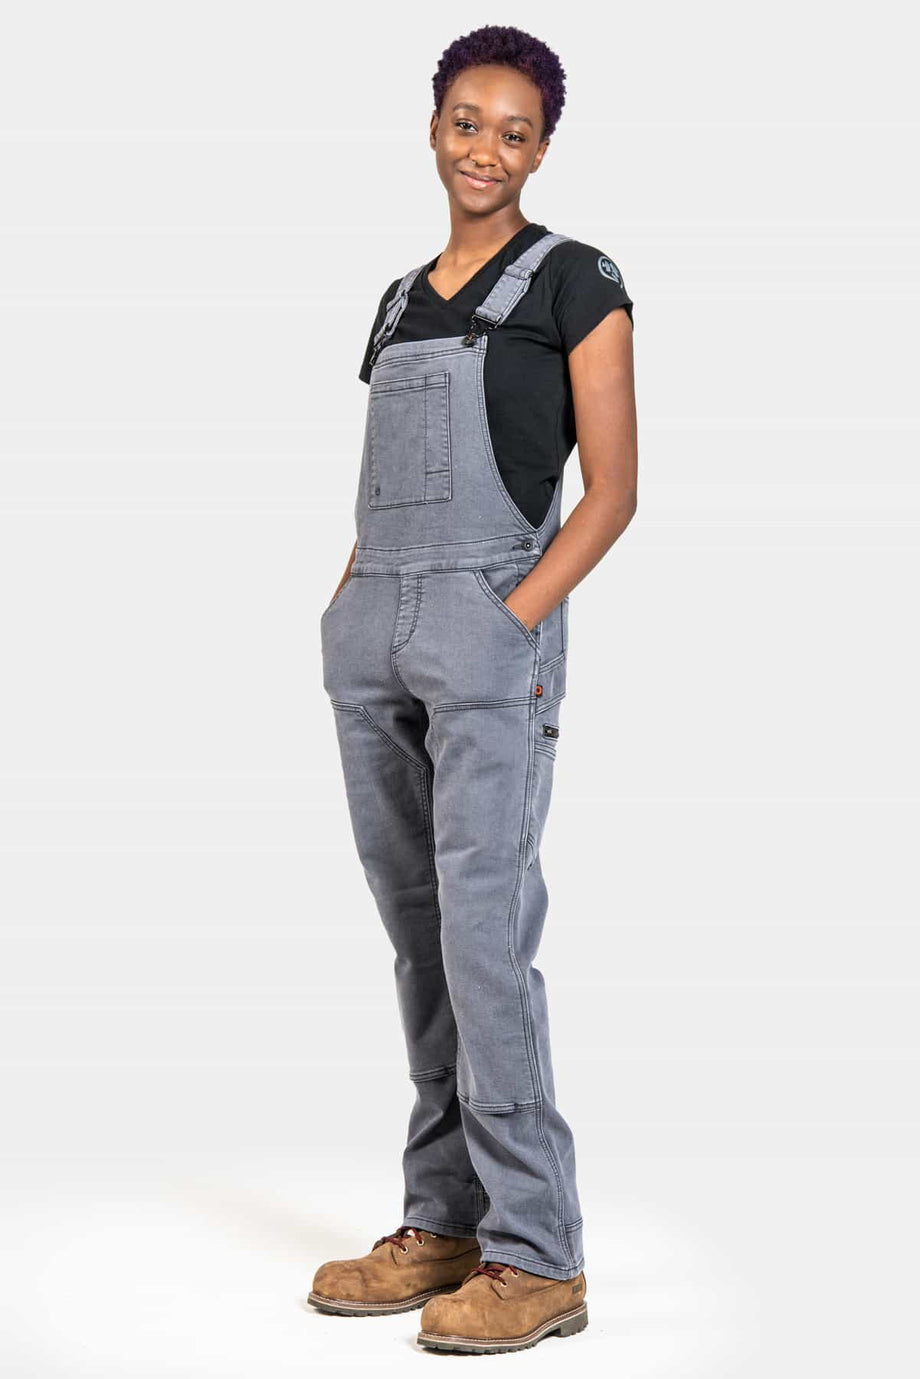 Women's Daily Denim Overall Jumpsuit